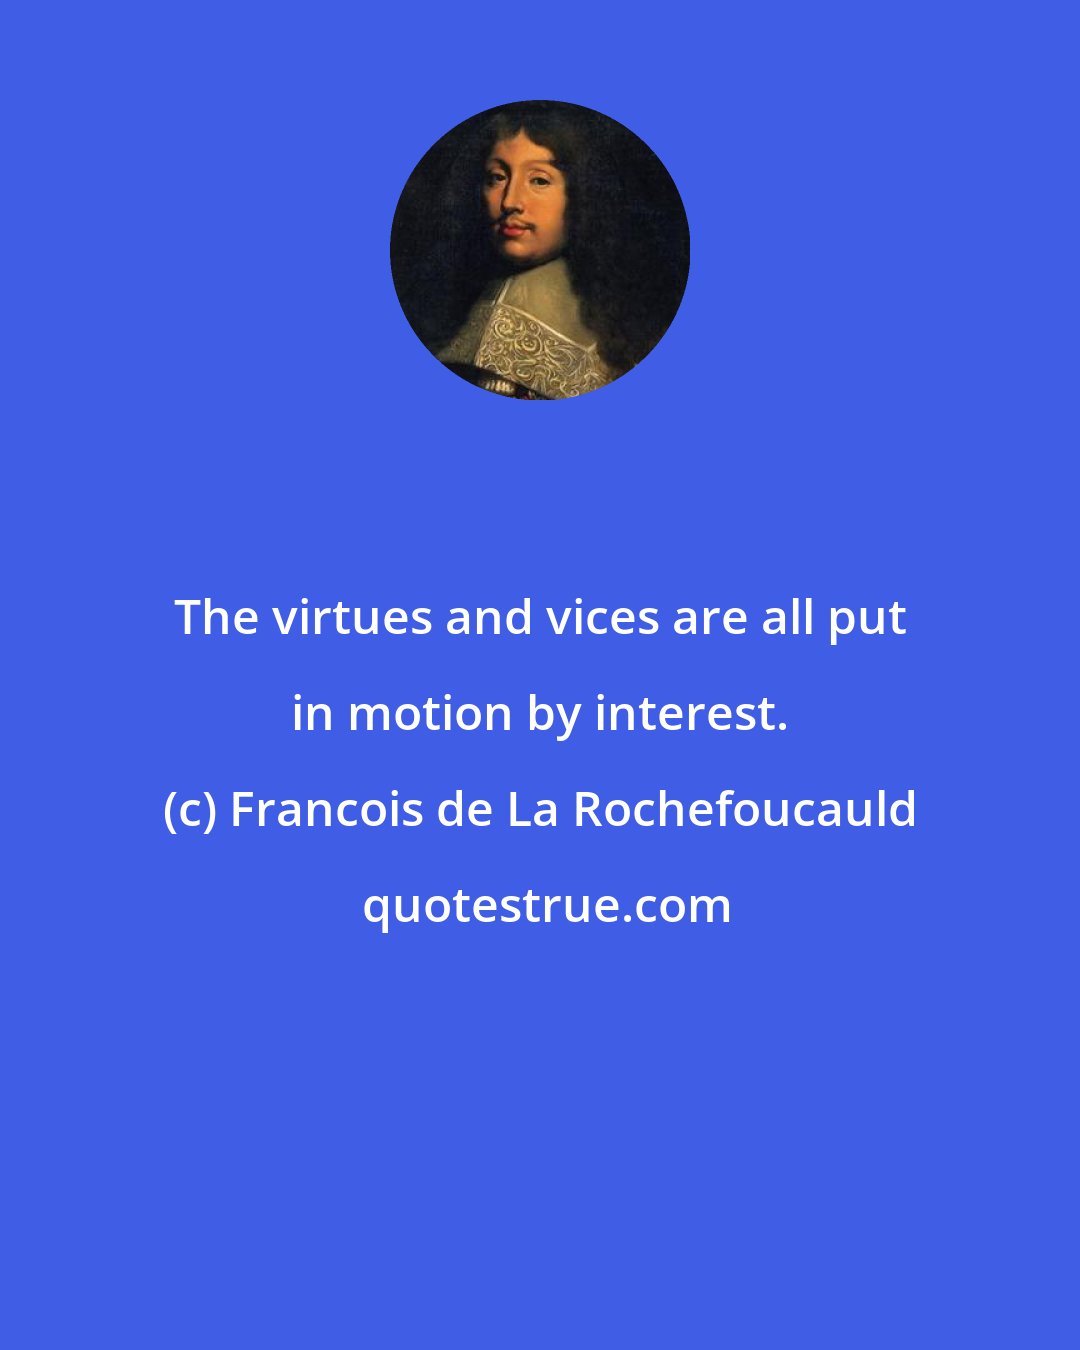 Francois de La Rochefoucauld: The virtues and vices are all put in motion by interest.